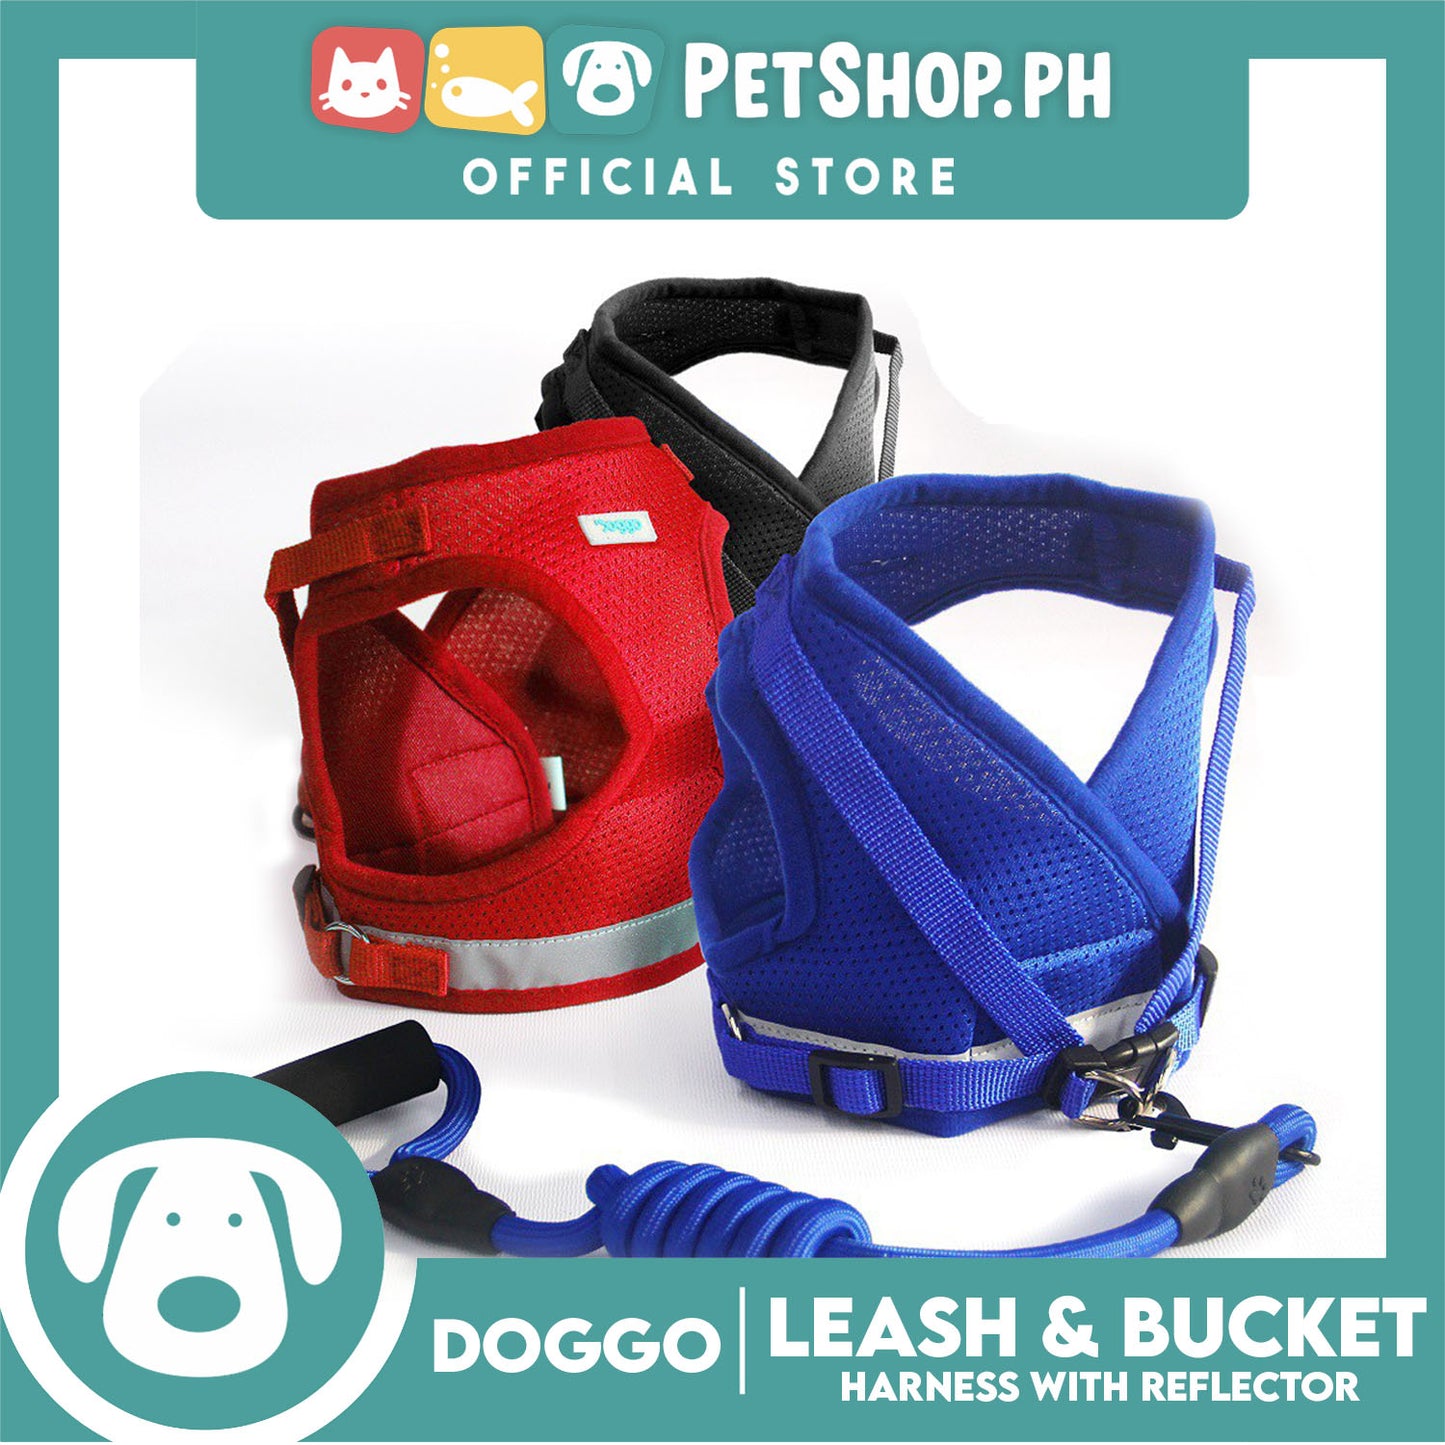 Doggo Leash and Bucket Harness with Reflector Small (Blue) Perfect Set for Your Dog